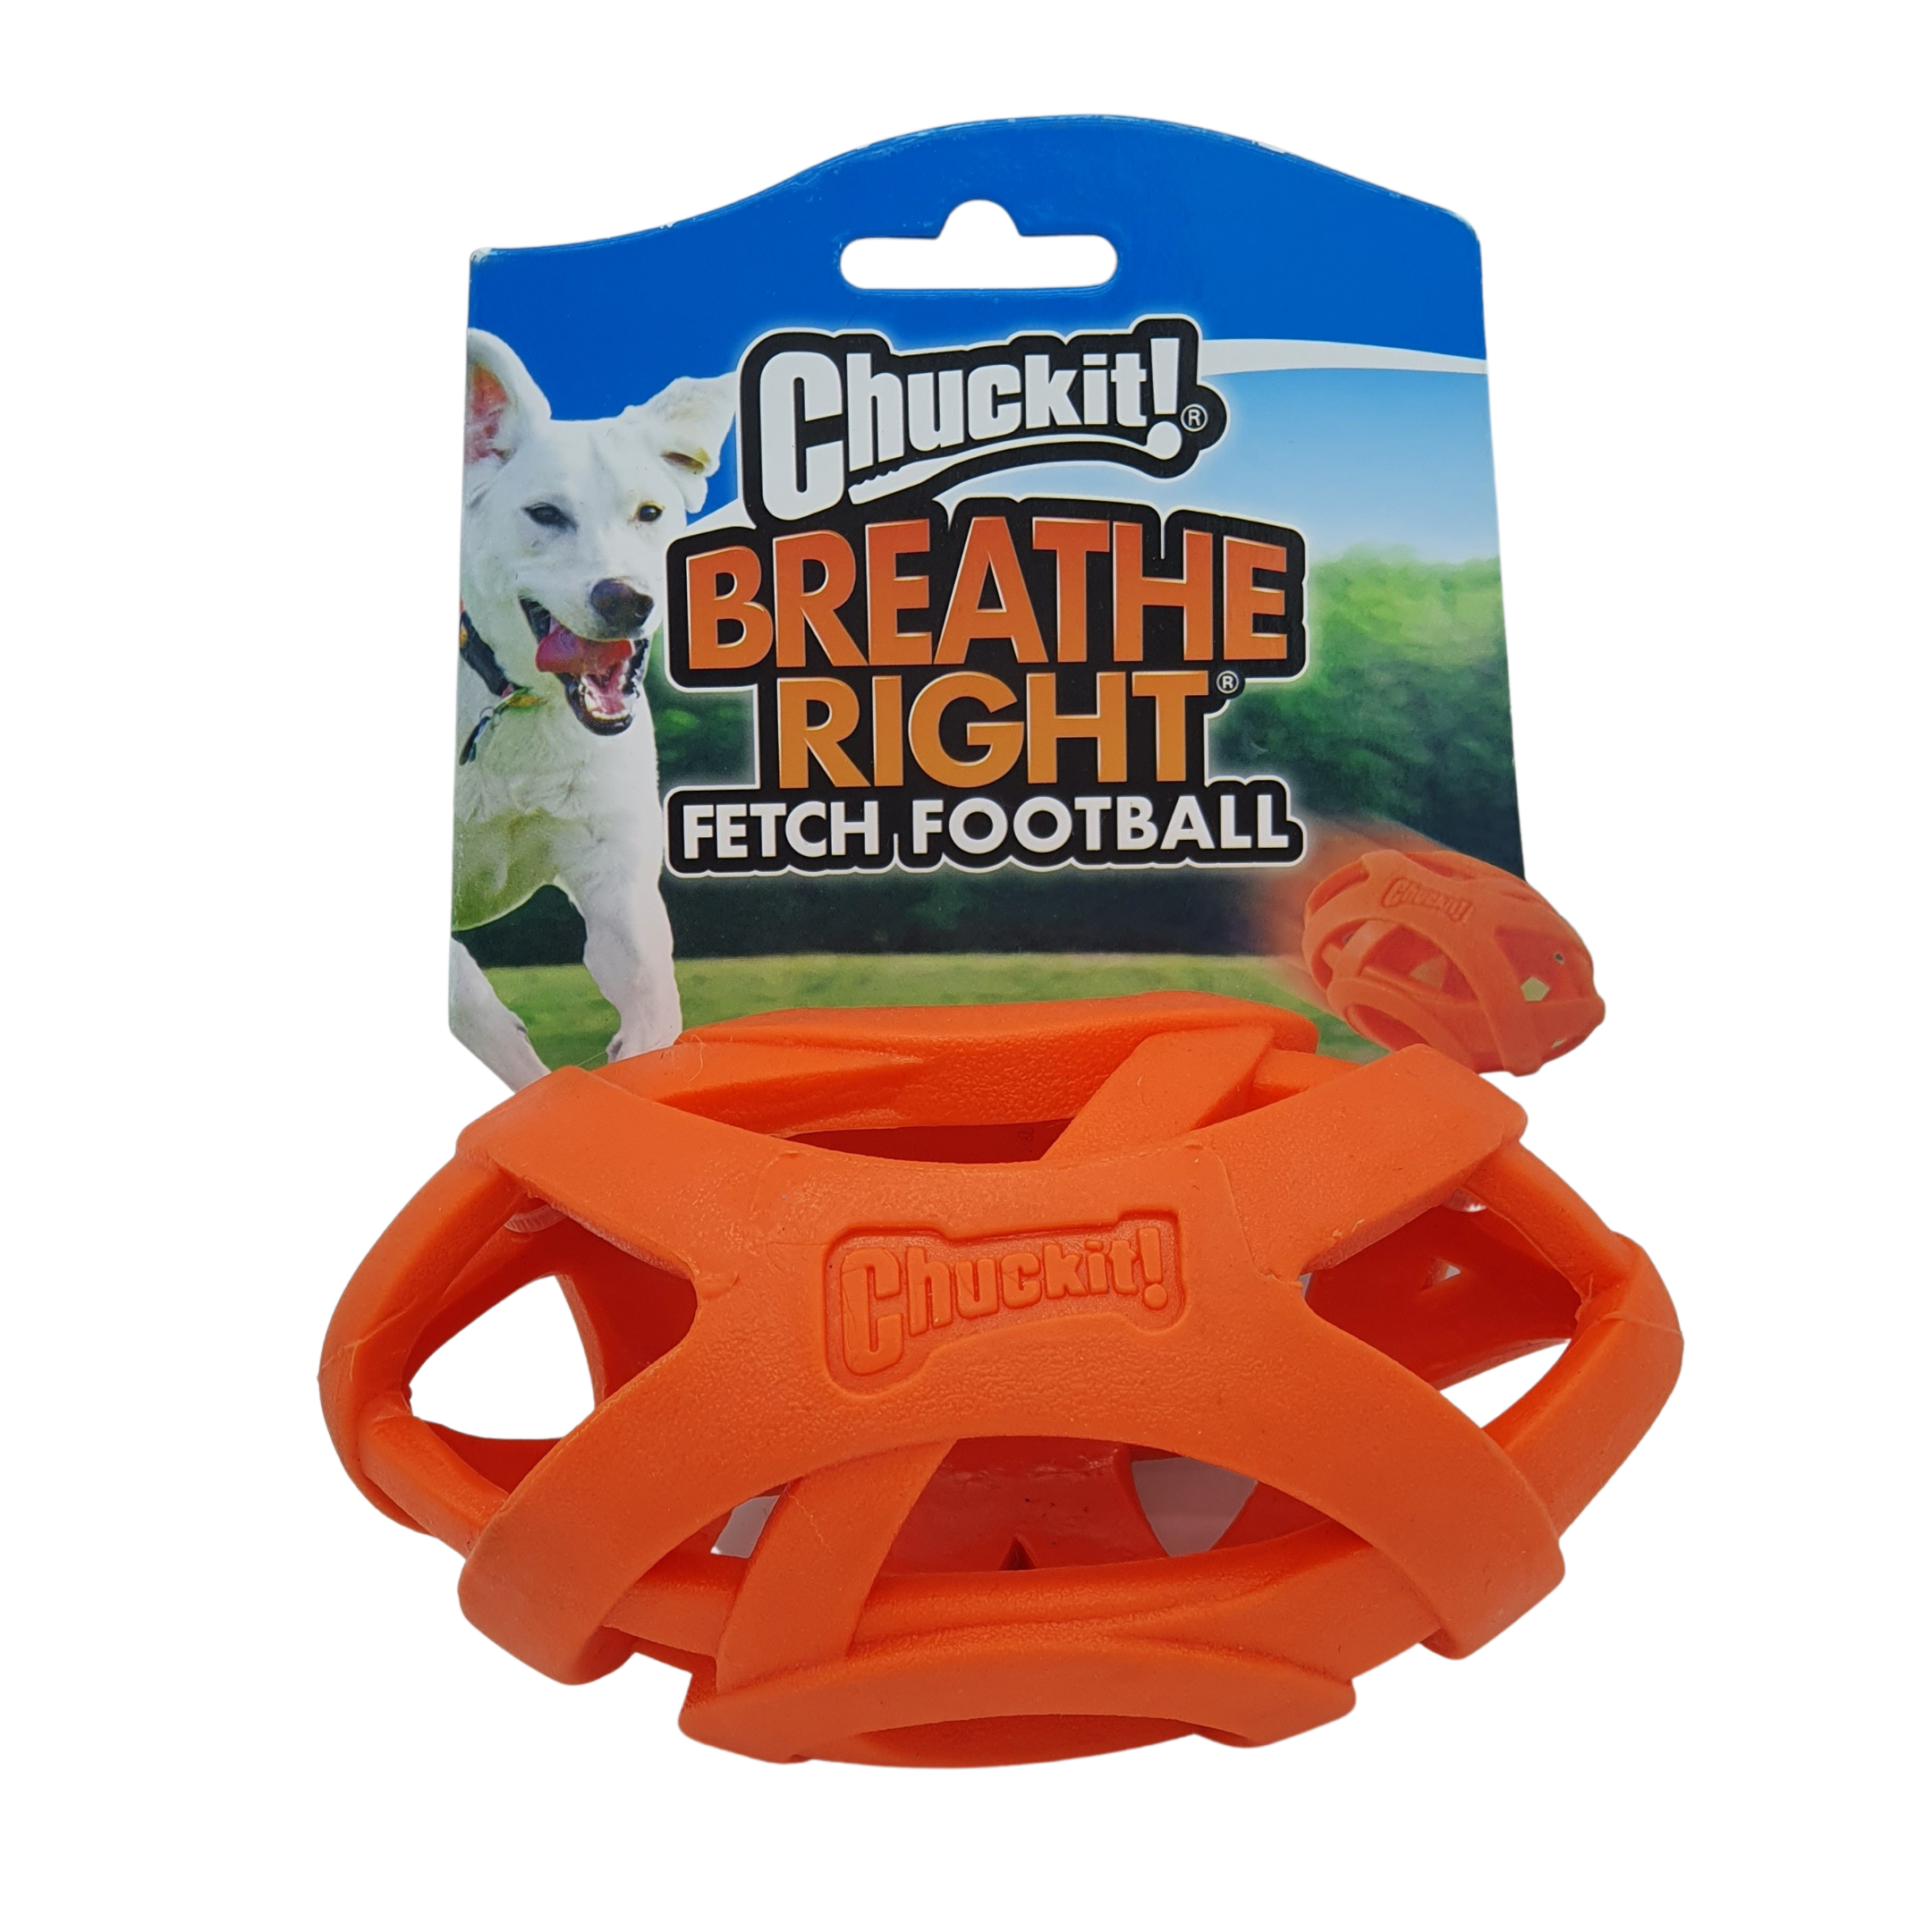 CHUCKIT BREATHE RIGHT FETCH RUGBY